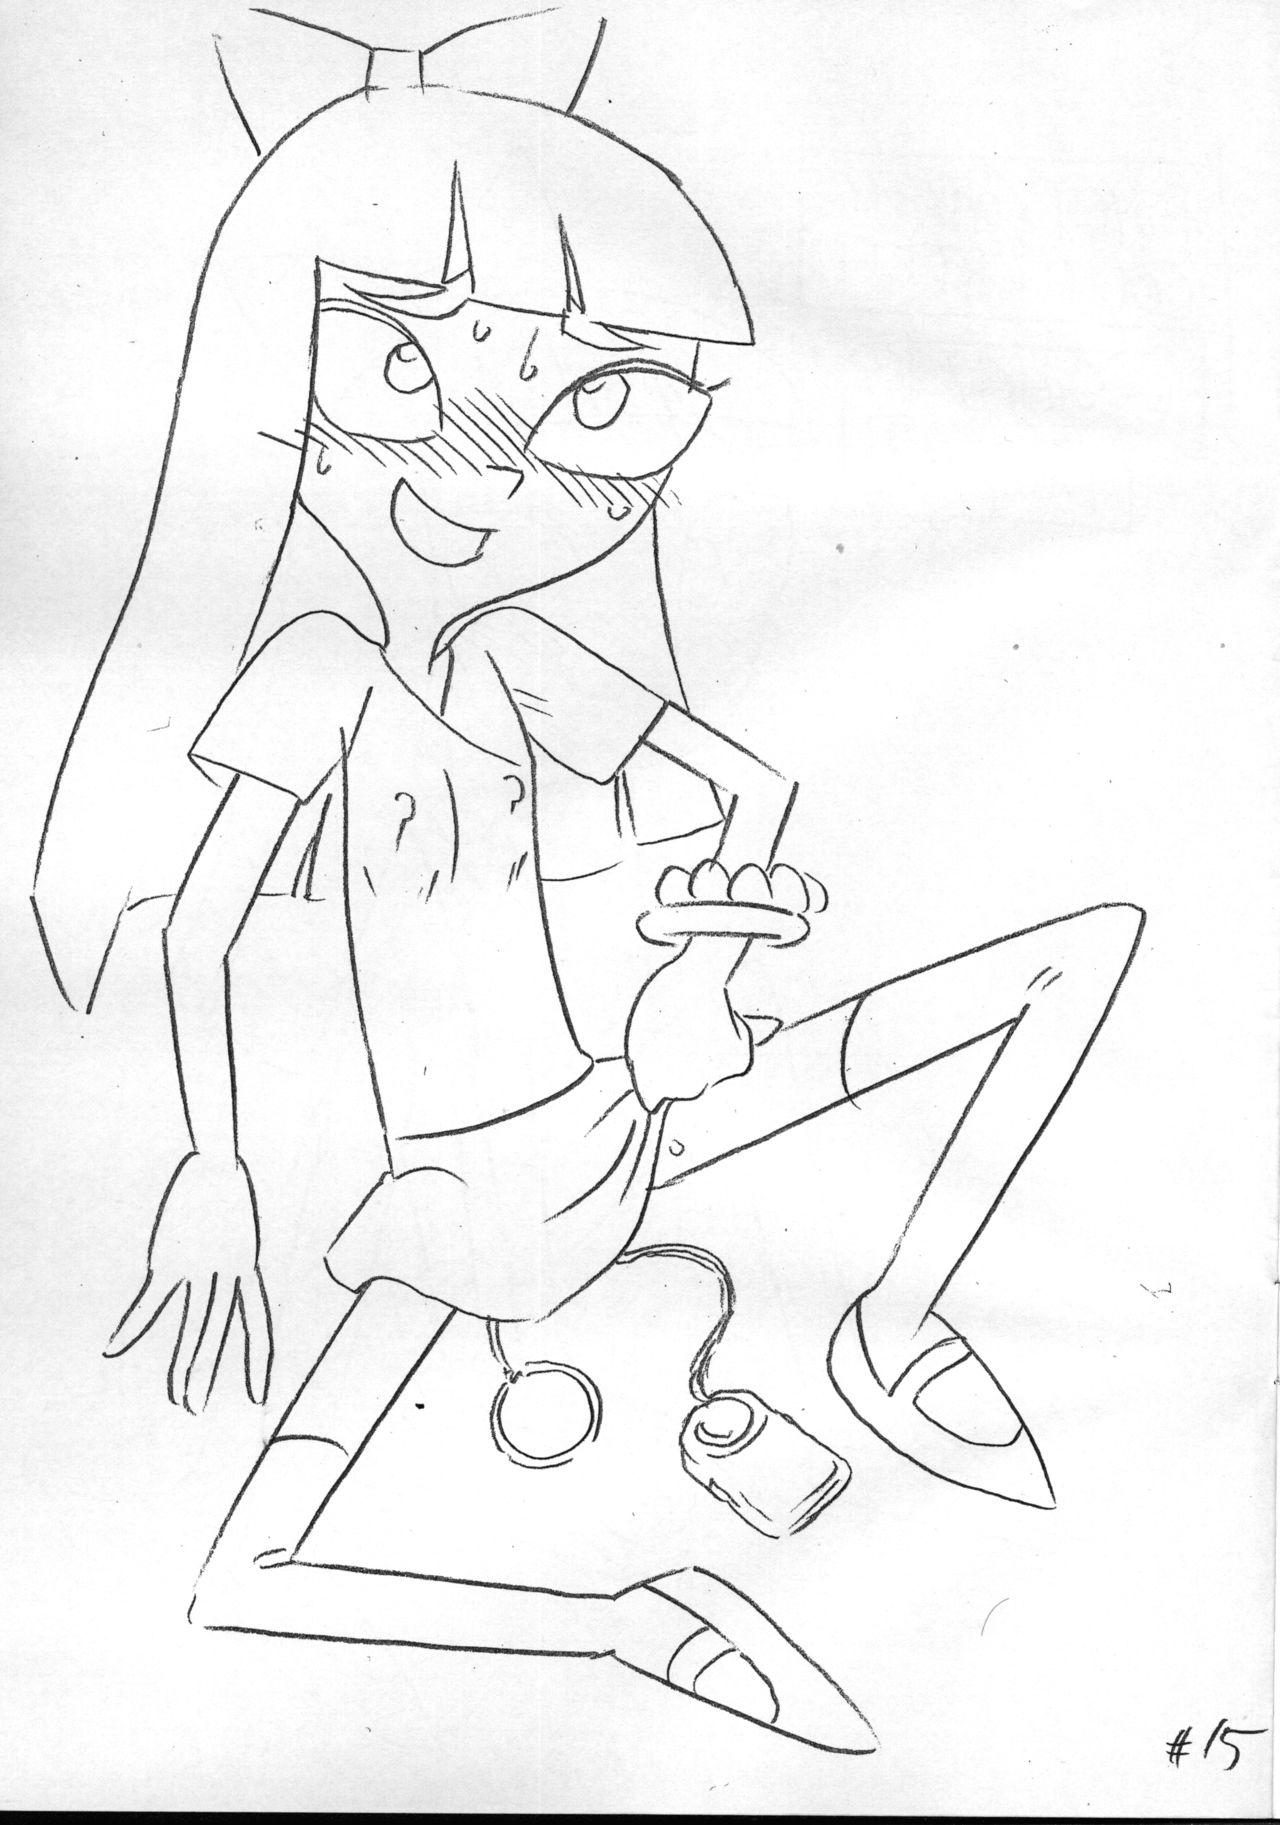 Boobies Psychosomatic Counterfeit Ex: Stacy in Early Age - Phineas and ferb Sex Pussy - Page 14